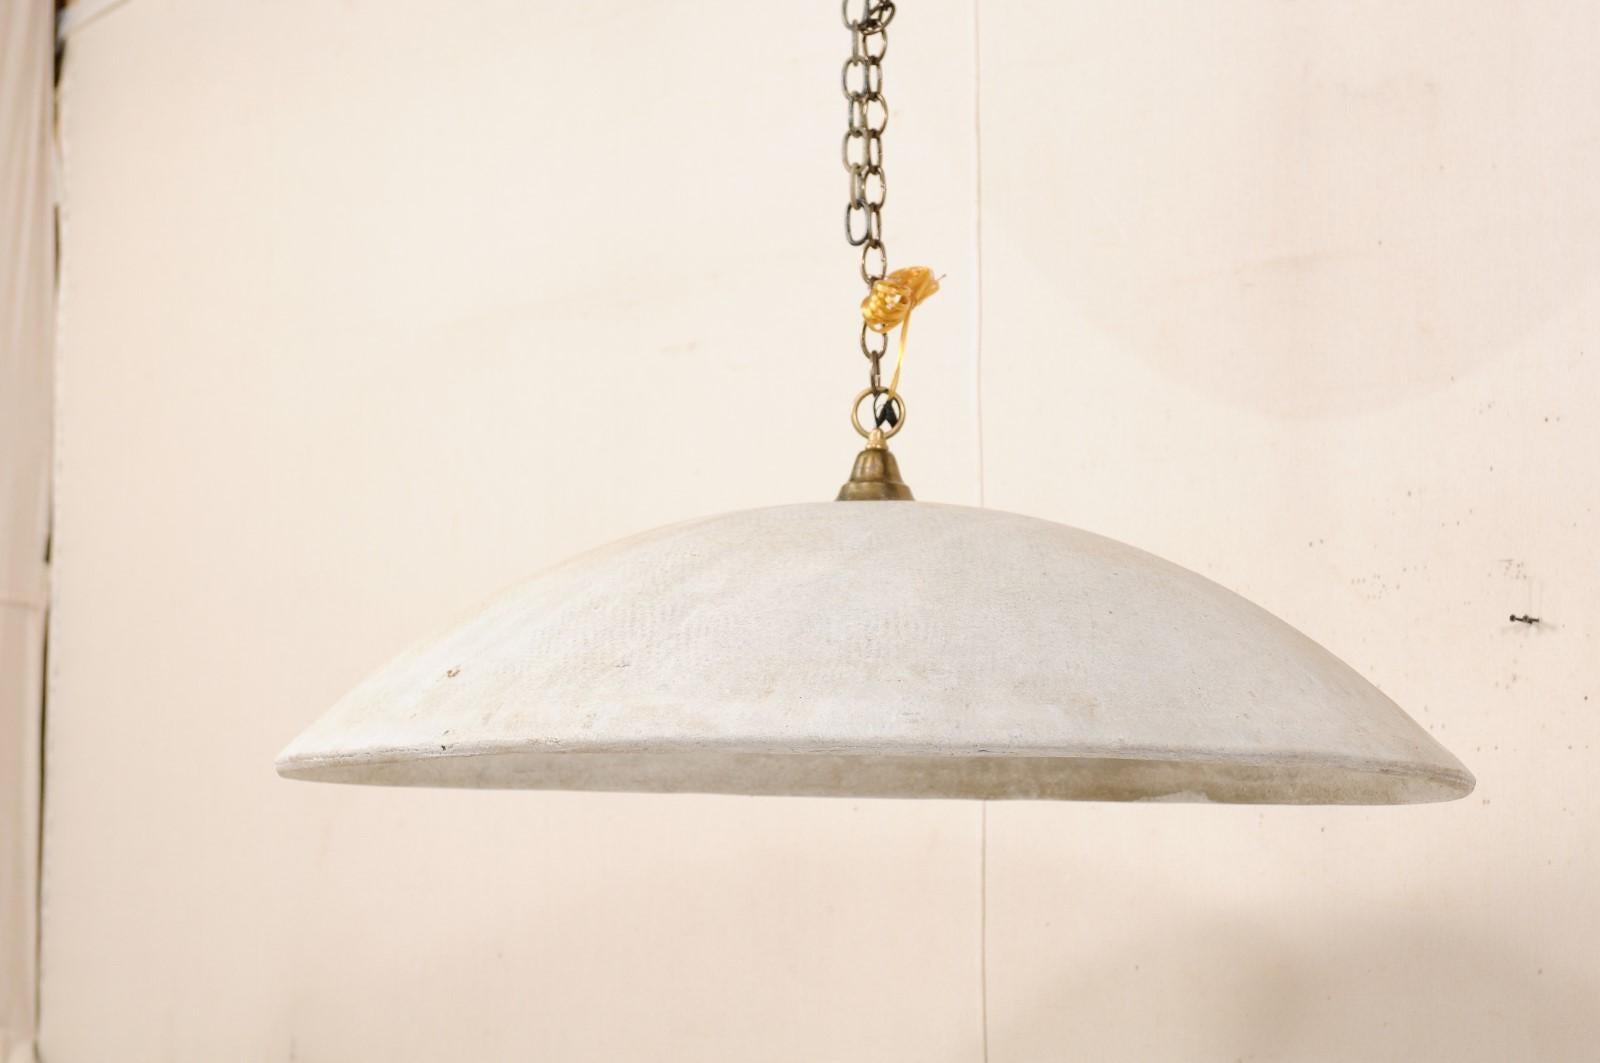 A nicely-sized, midcentury hanging dome light created by Swiss neo-functionalist designer Willy Guhl (1915-2004). This vintage chandelier, in typical Willy Guhl fashion, is constructed of eternite (a durable and light-weight fiber cement), and